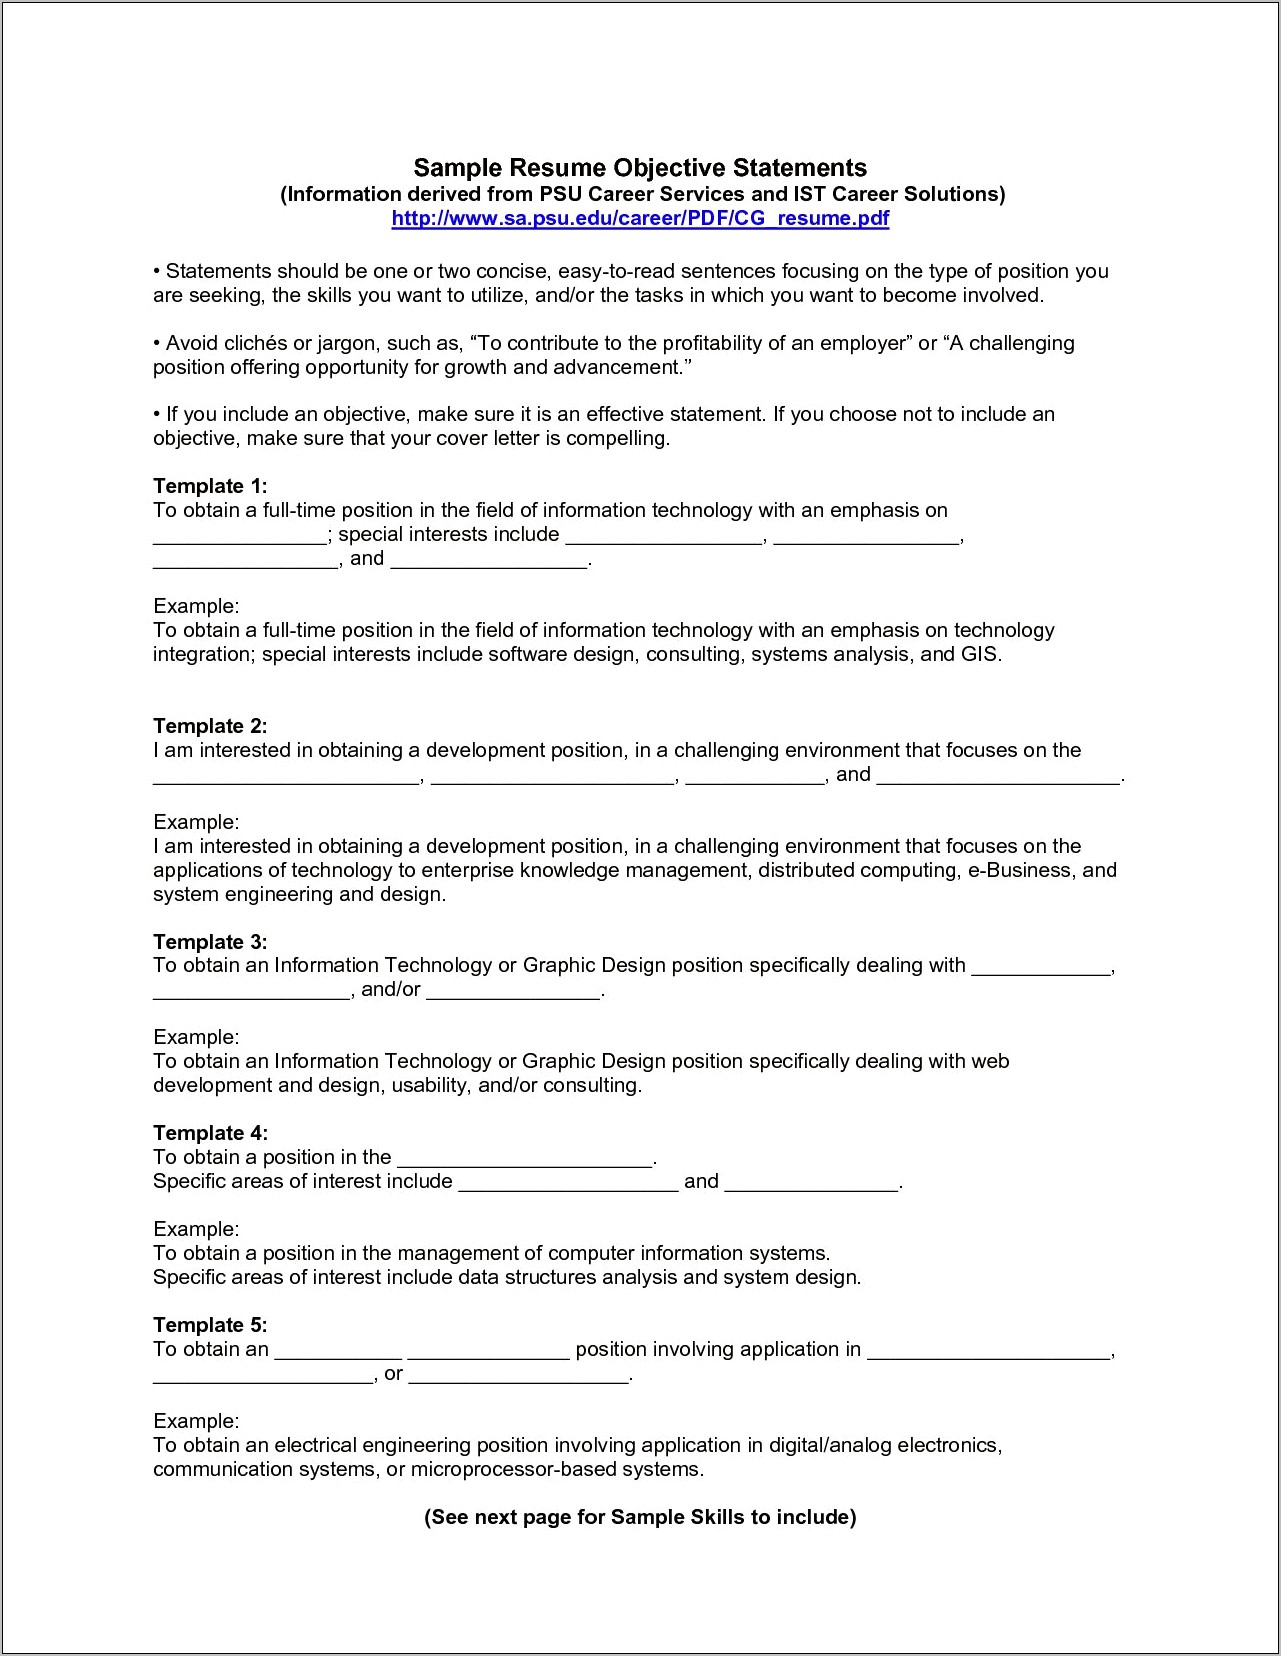 Good Objective Statements For Entry Level Resume